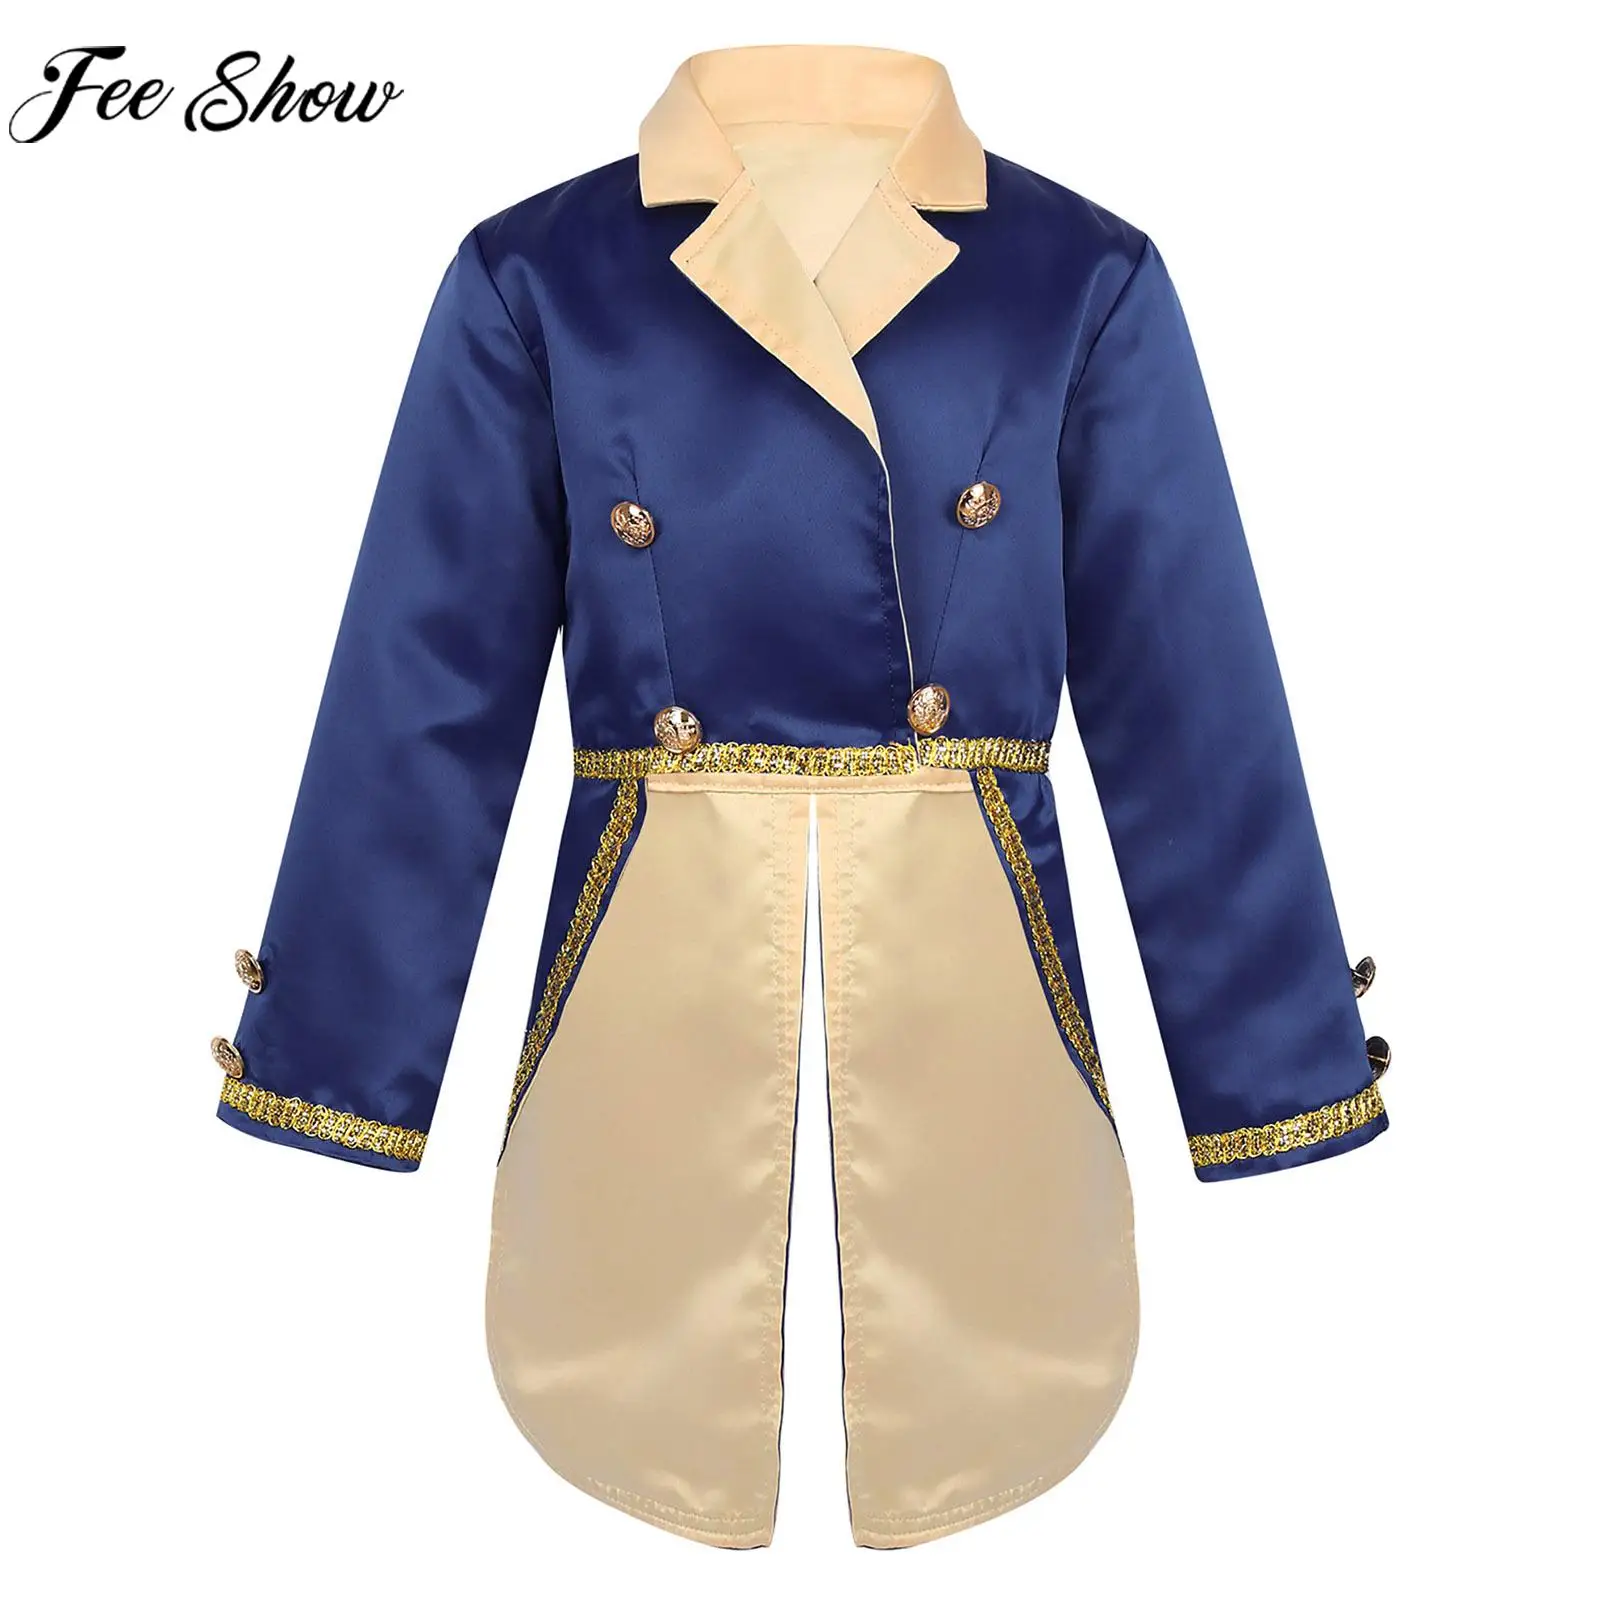 

Kids Boys Long Sleeve Tuxedo Jacket Prince Cosplay Costume Turn-Down Collar Tailcoat for Halloween Party Role Play Photography